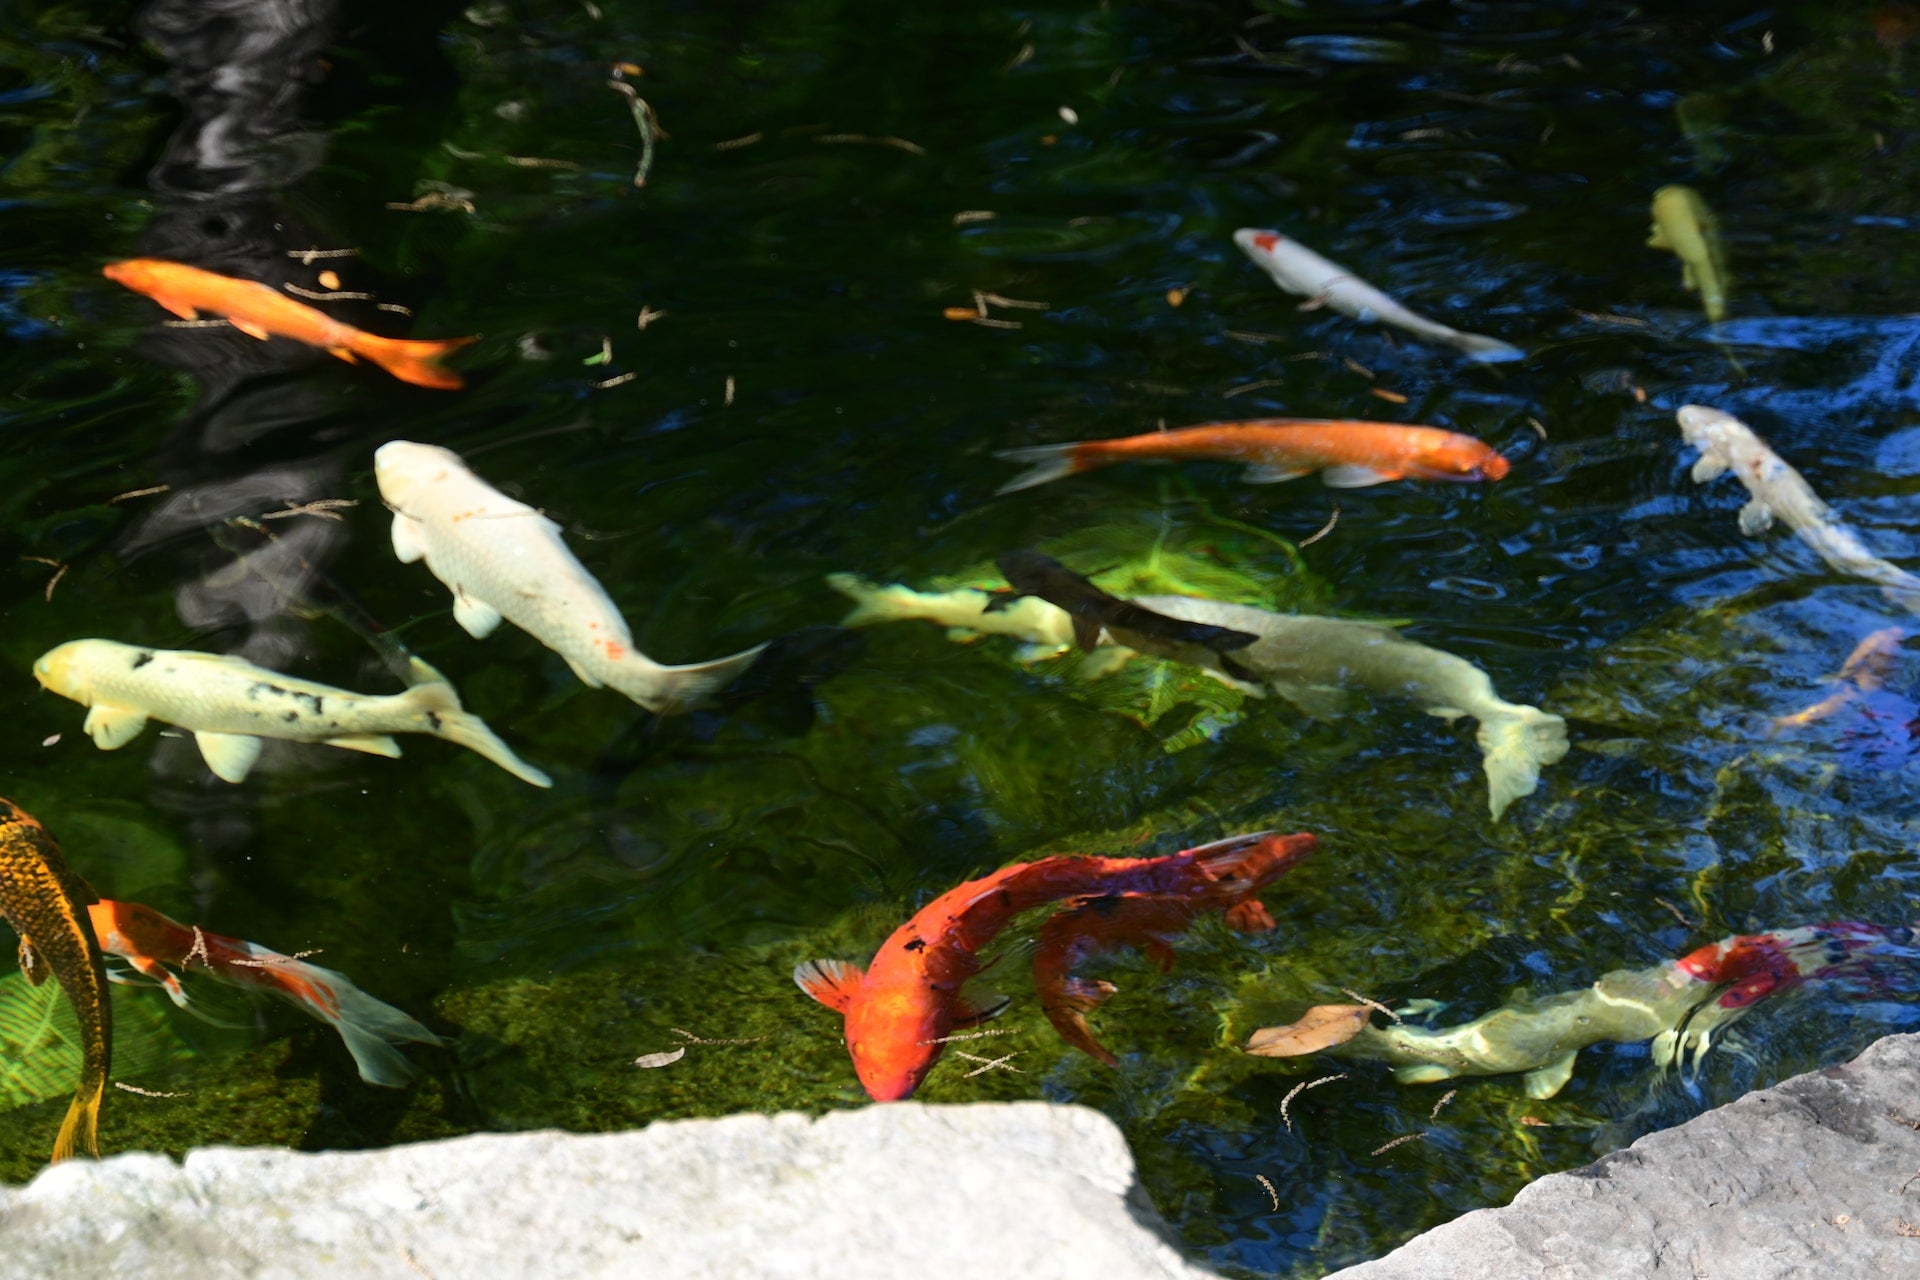 A group of koi fish swimming in a garden pond